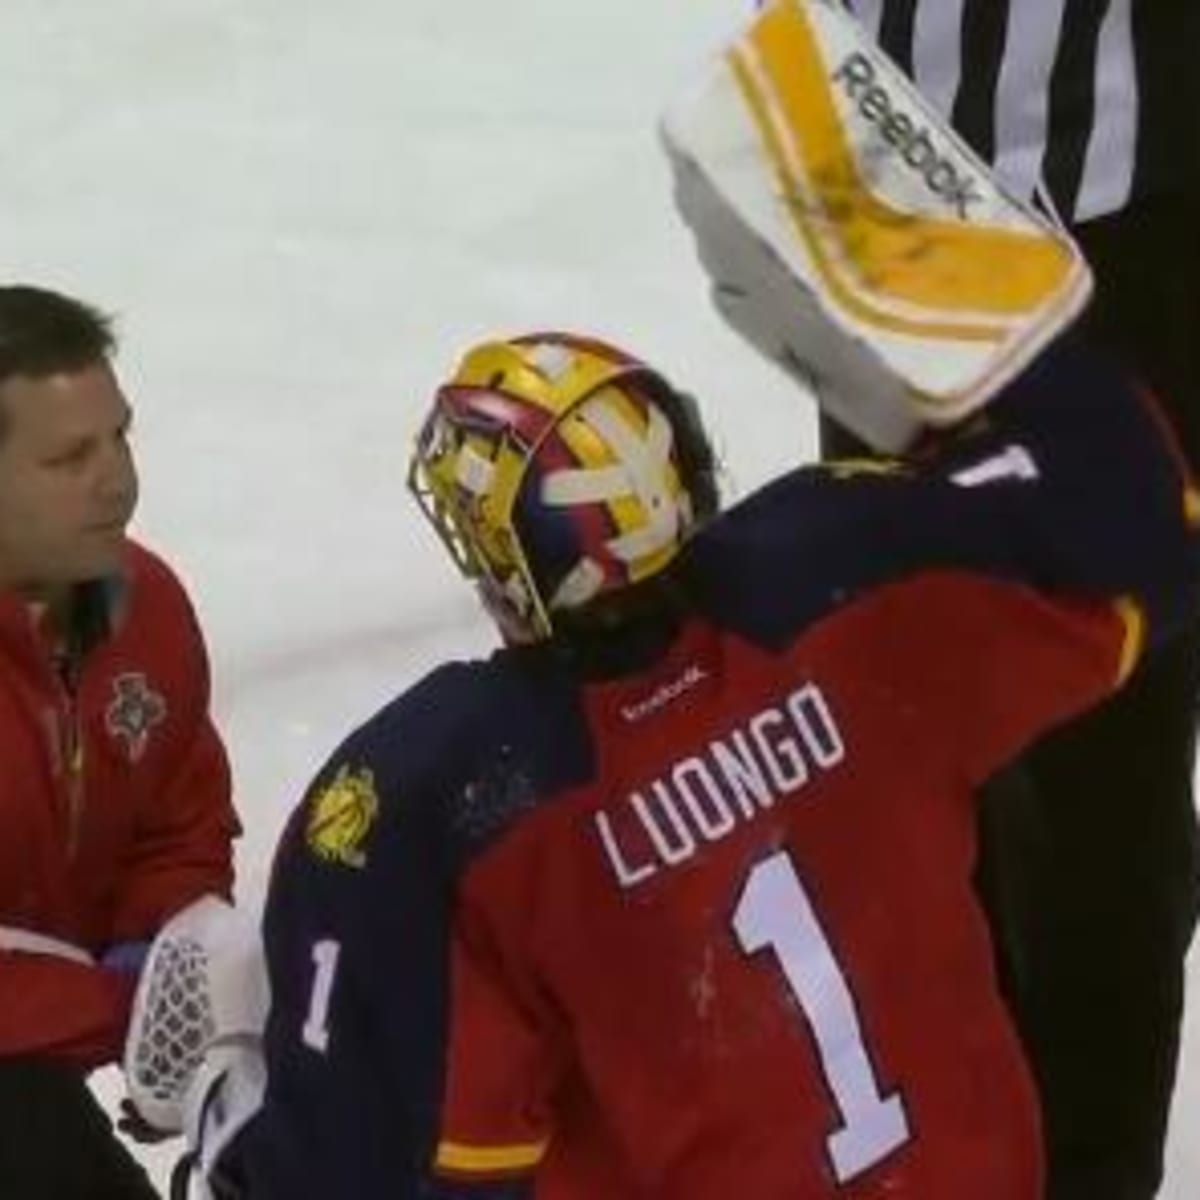 Panthers' Luongo out with upper-body injury